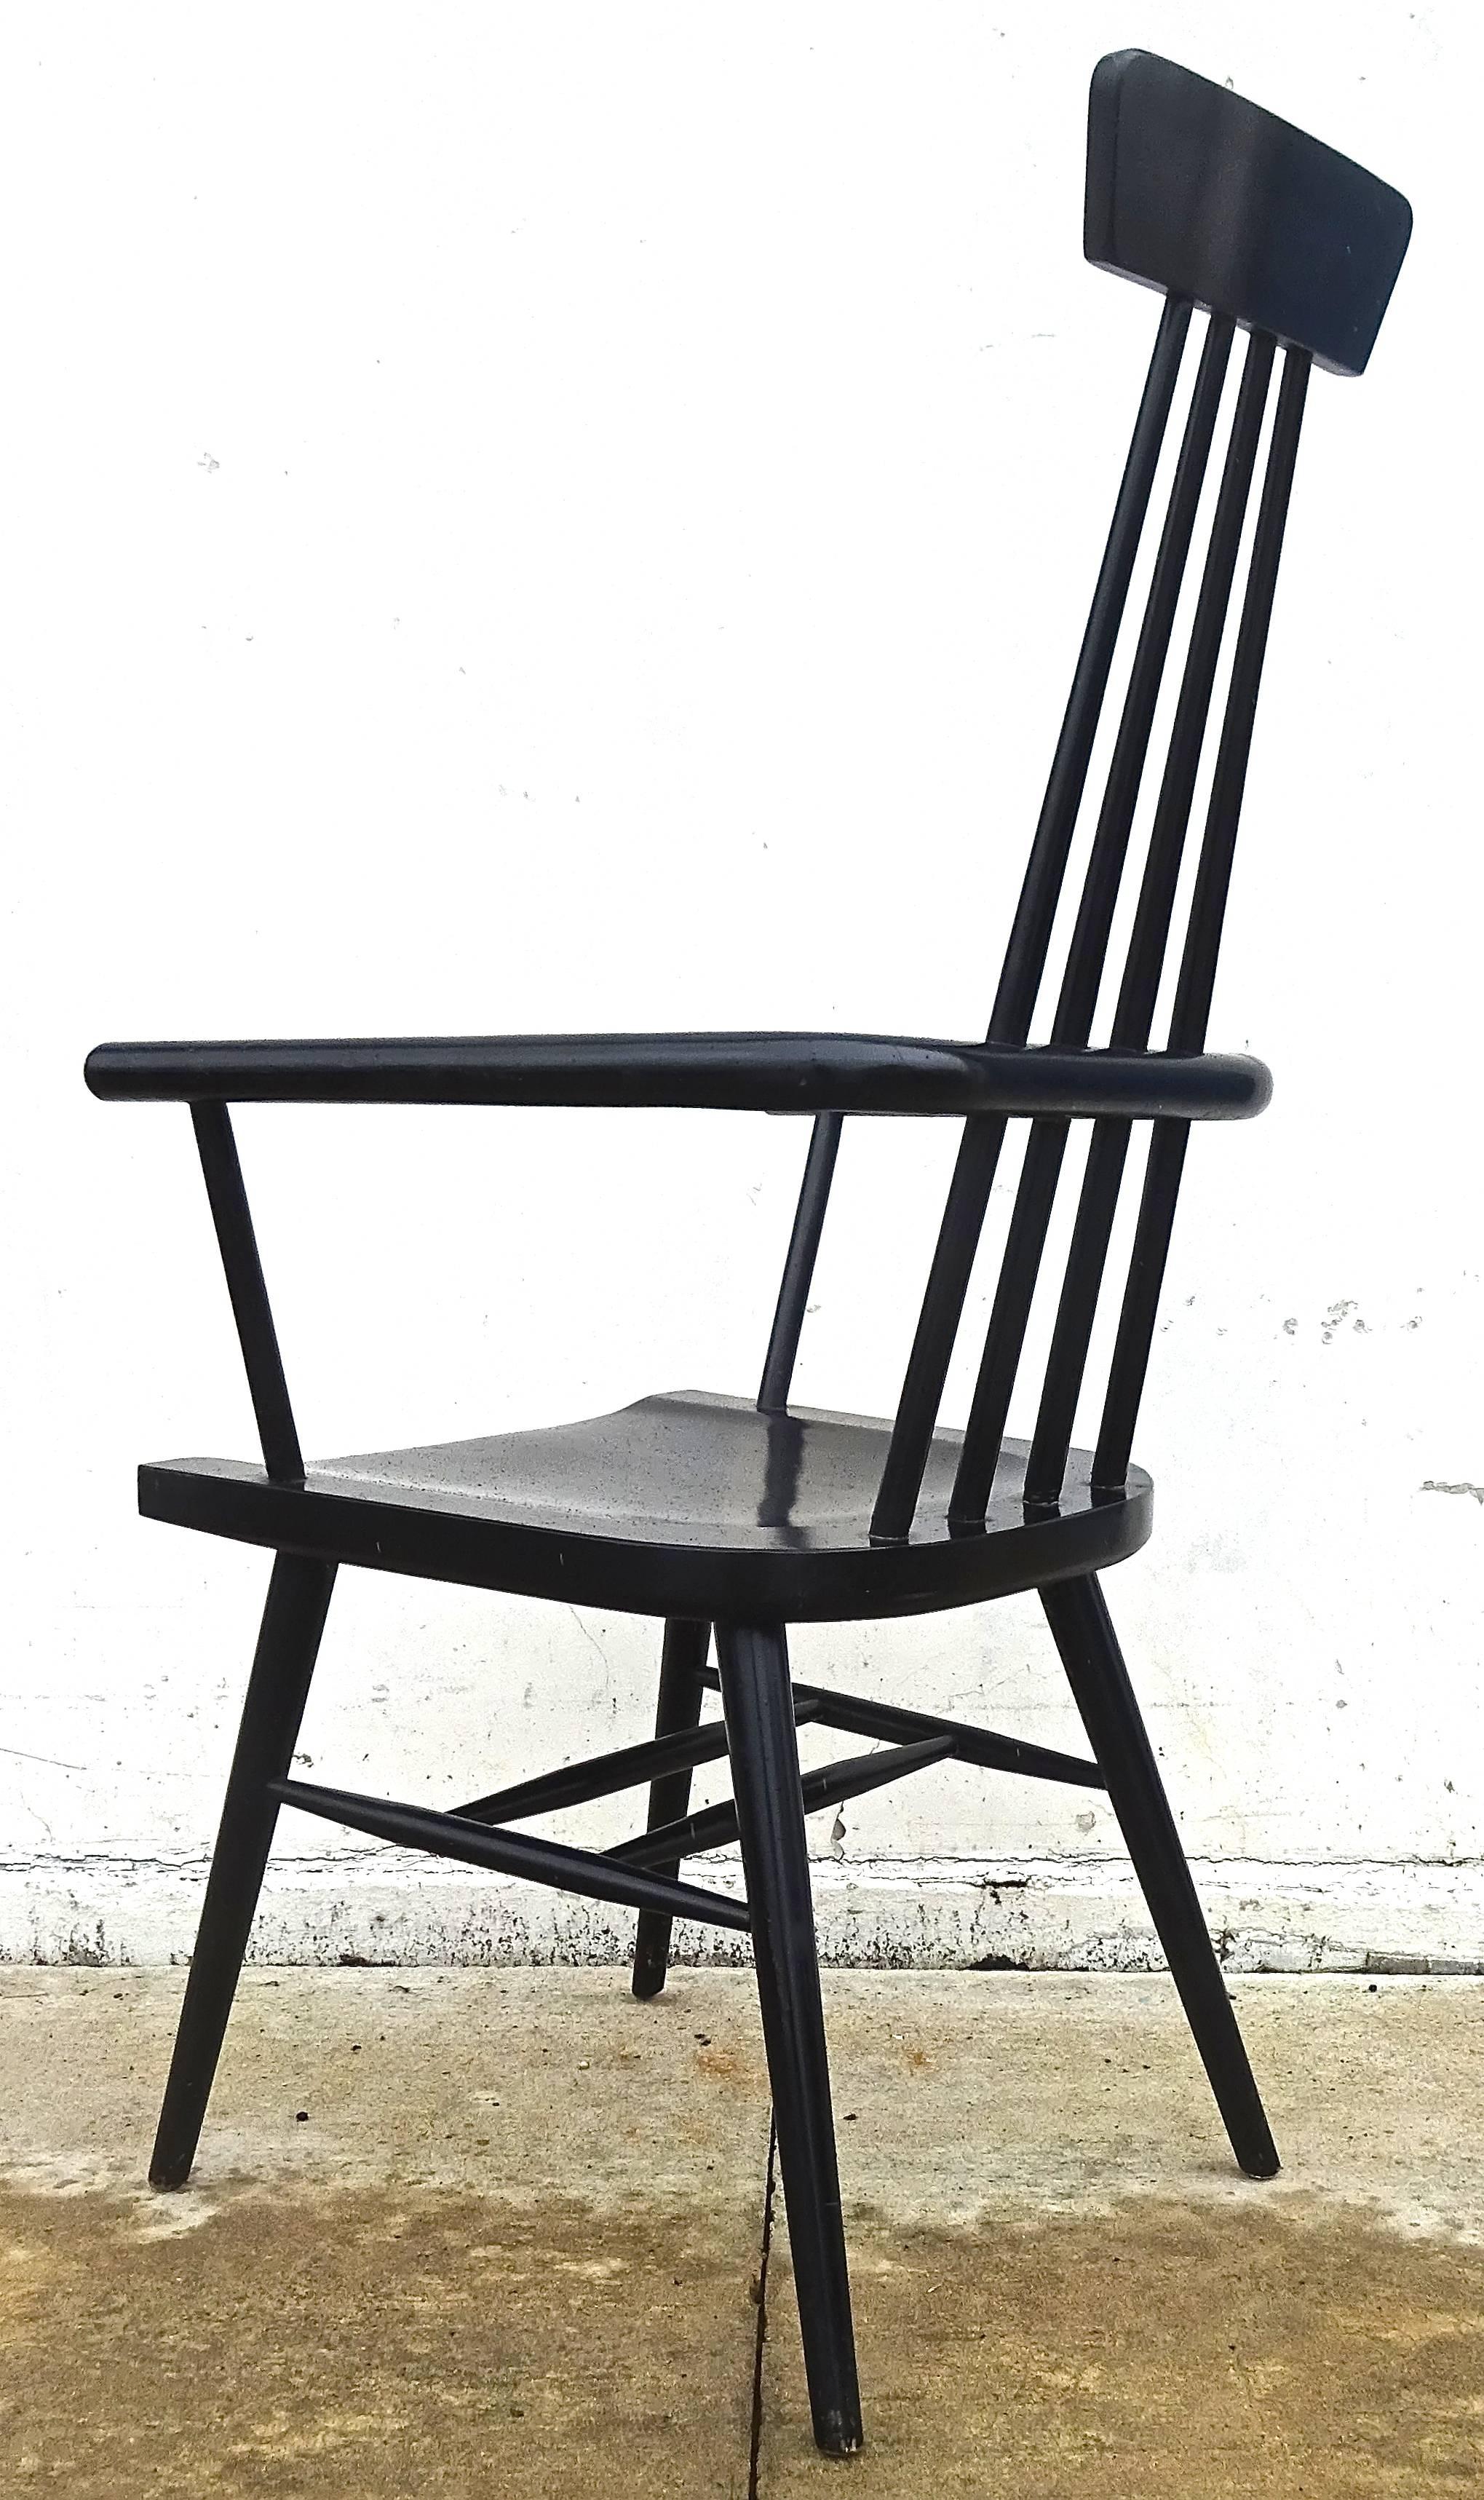 Rare 1950s Paul McCobb Lacquered Modernist Windsor Chair For Sale 1